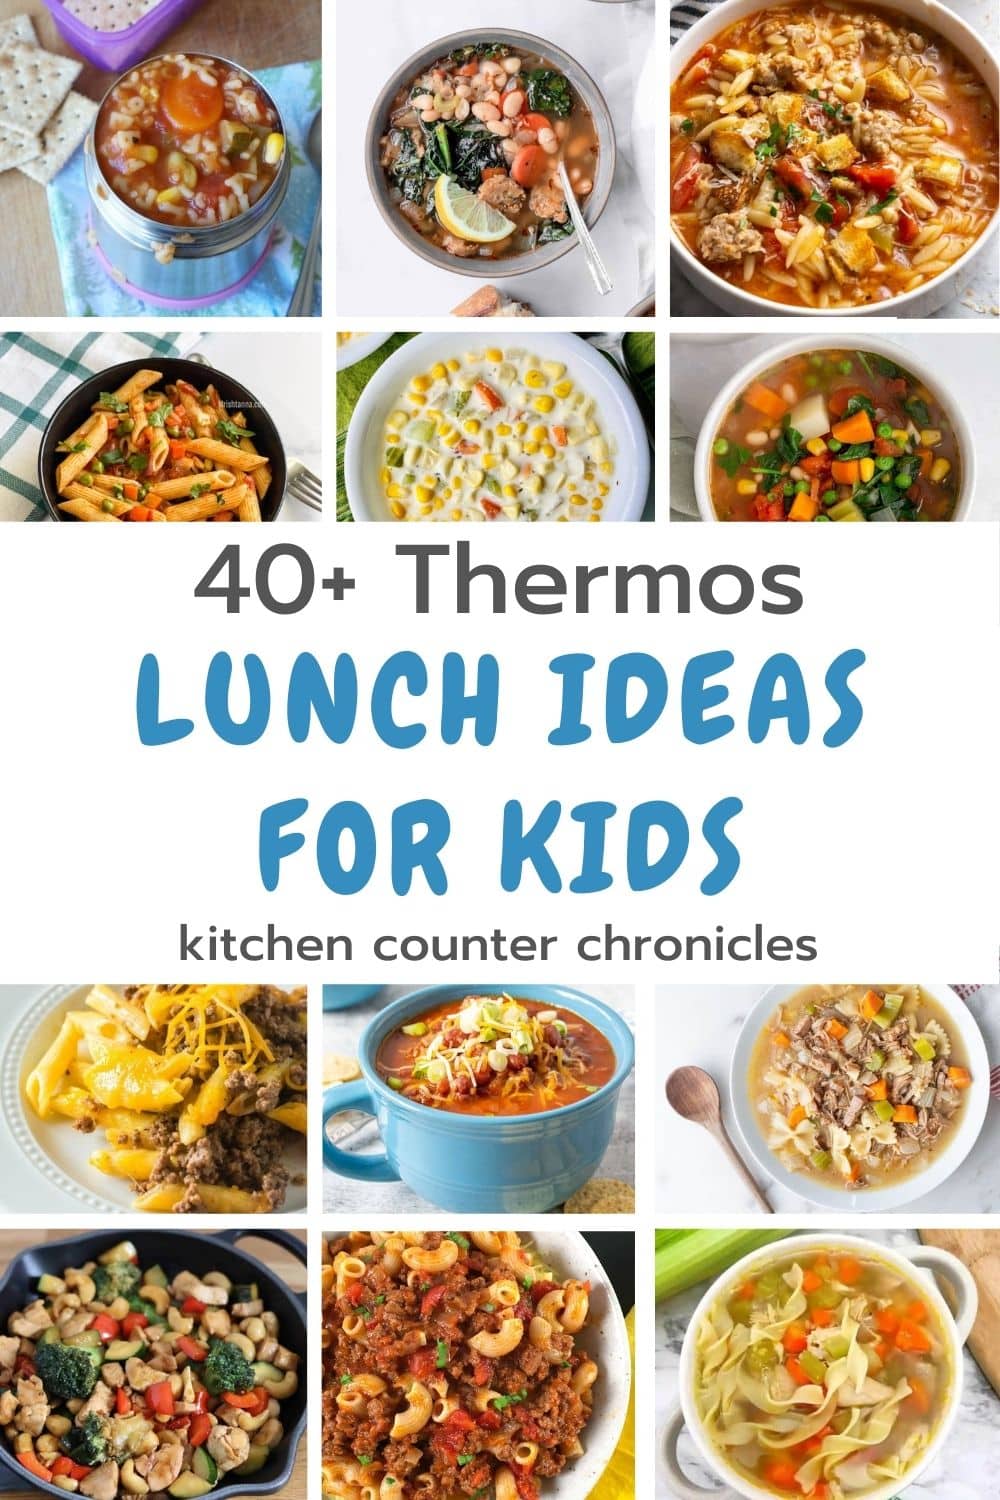 collage of thermos lunch ideas for kids soups, pasta dishes, stews..with the title